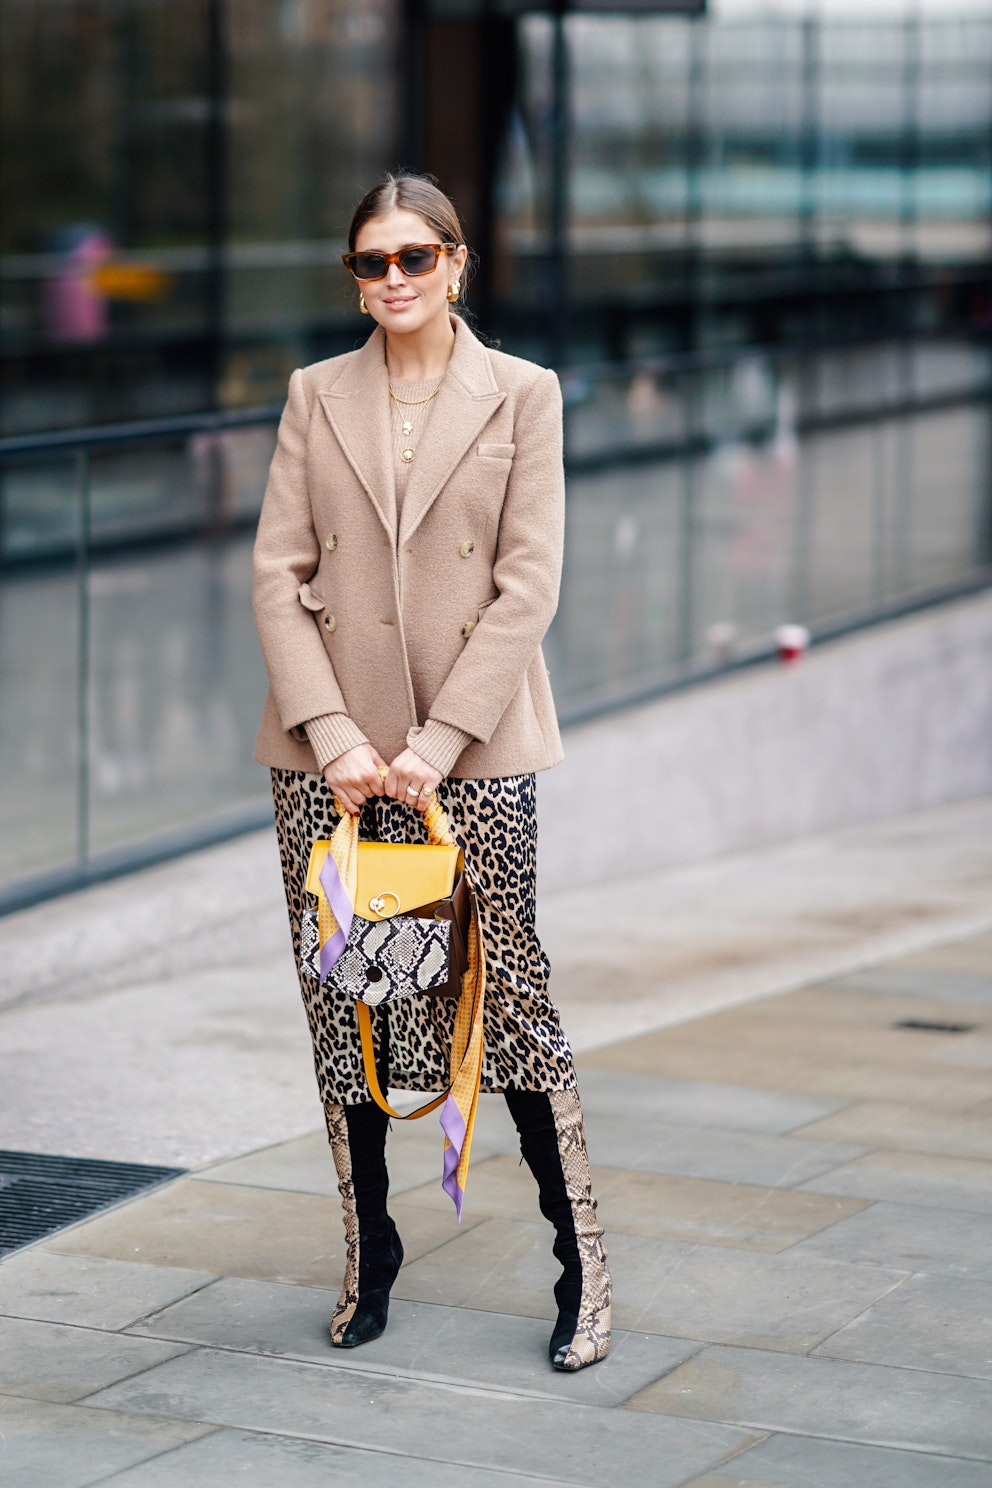 The Best Street Style At London Fashion Week